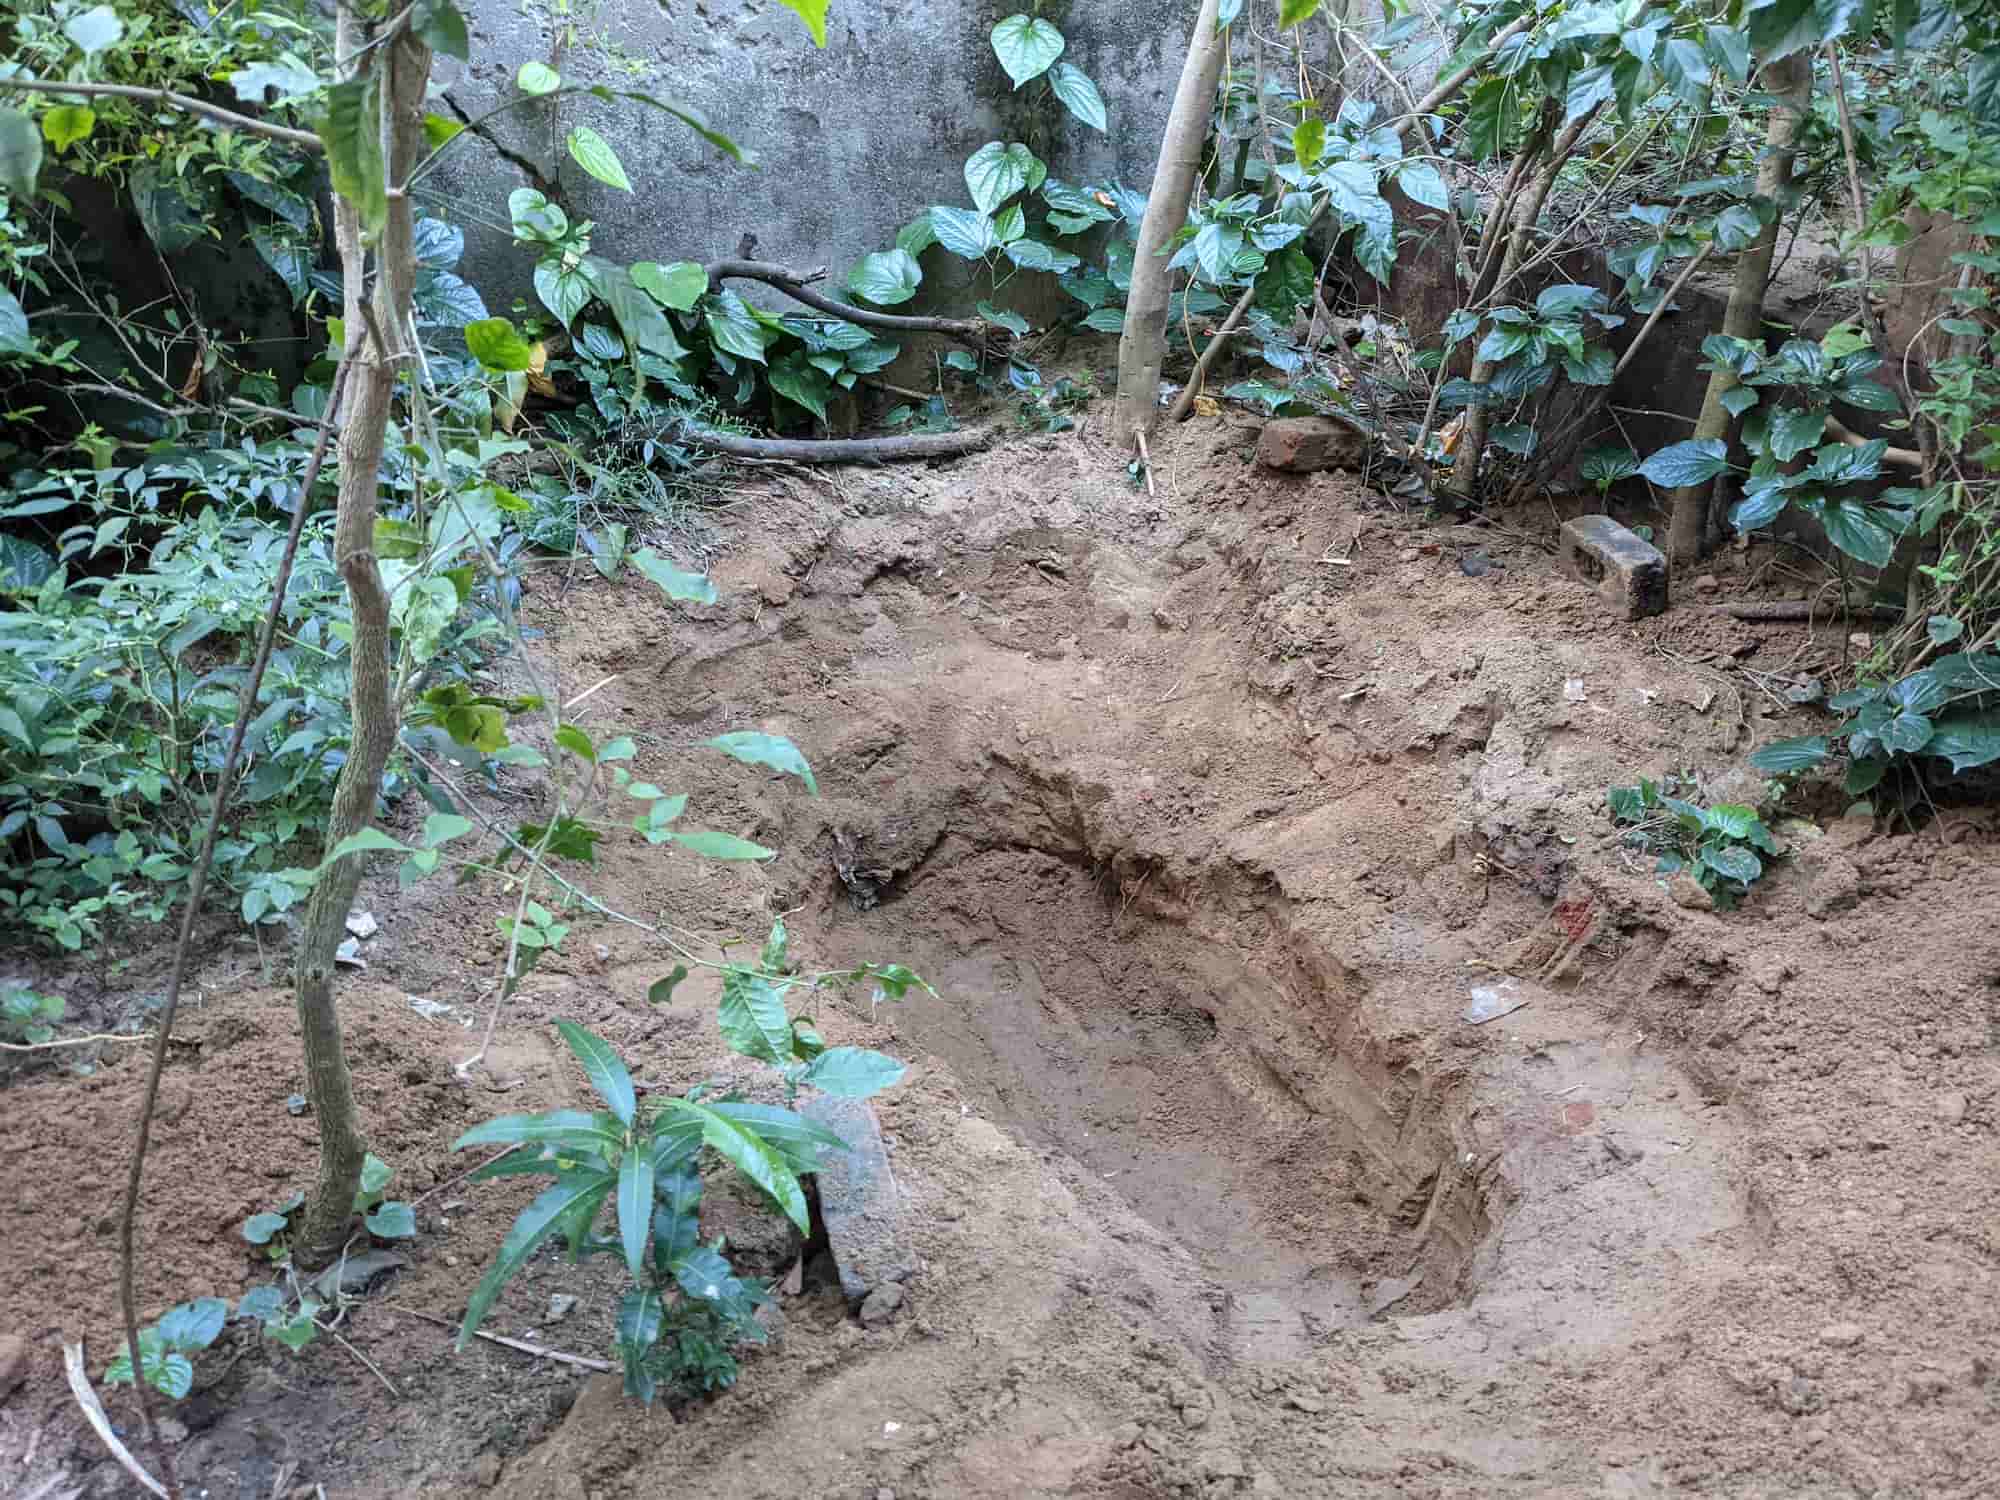 The pit after digging